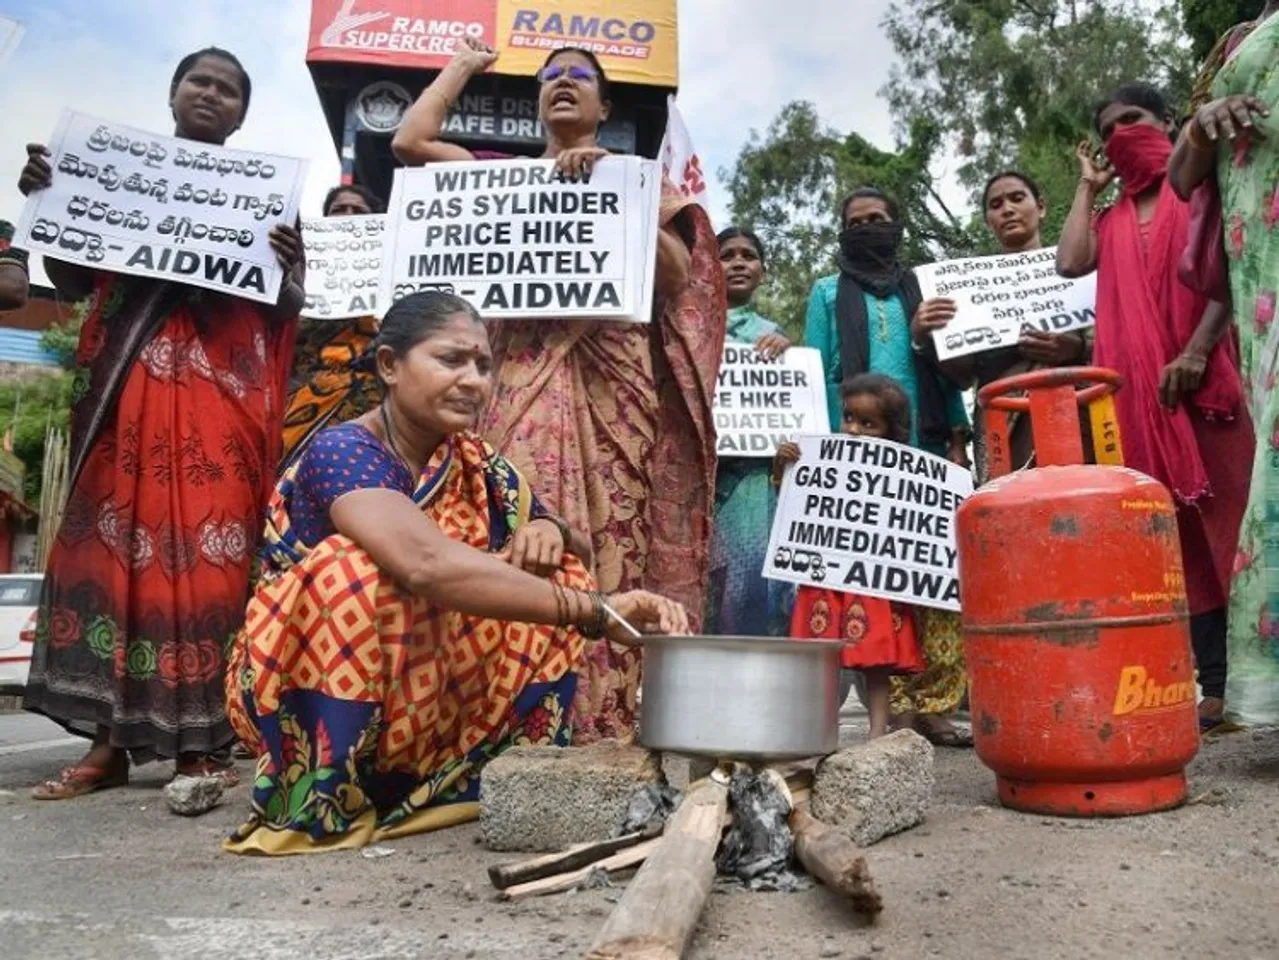 Widespread protests across India against LPG cylinder price hike